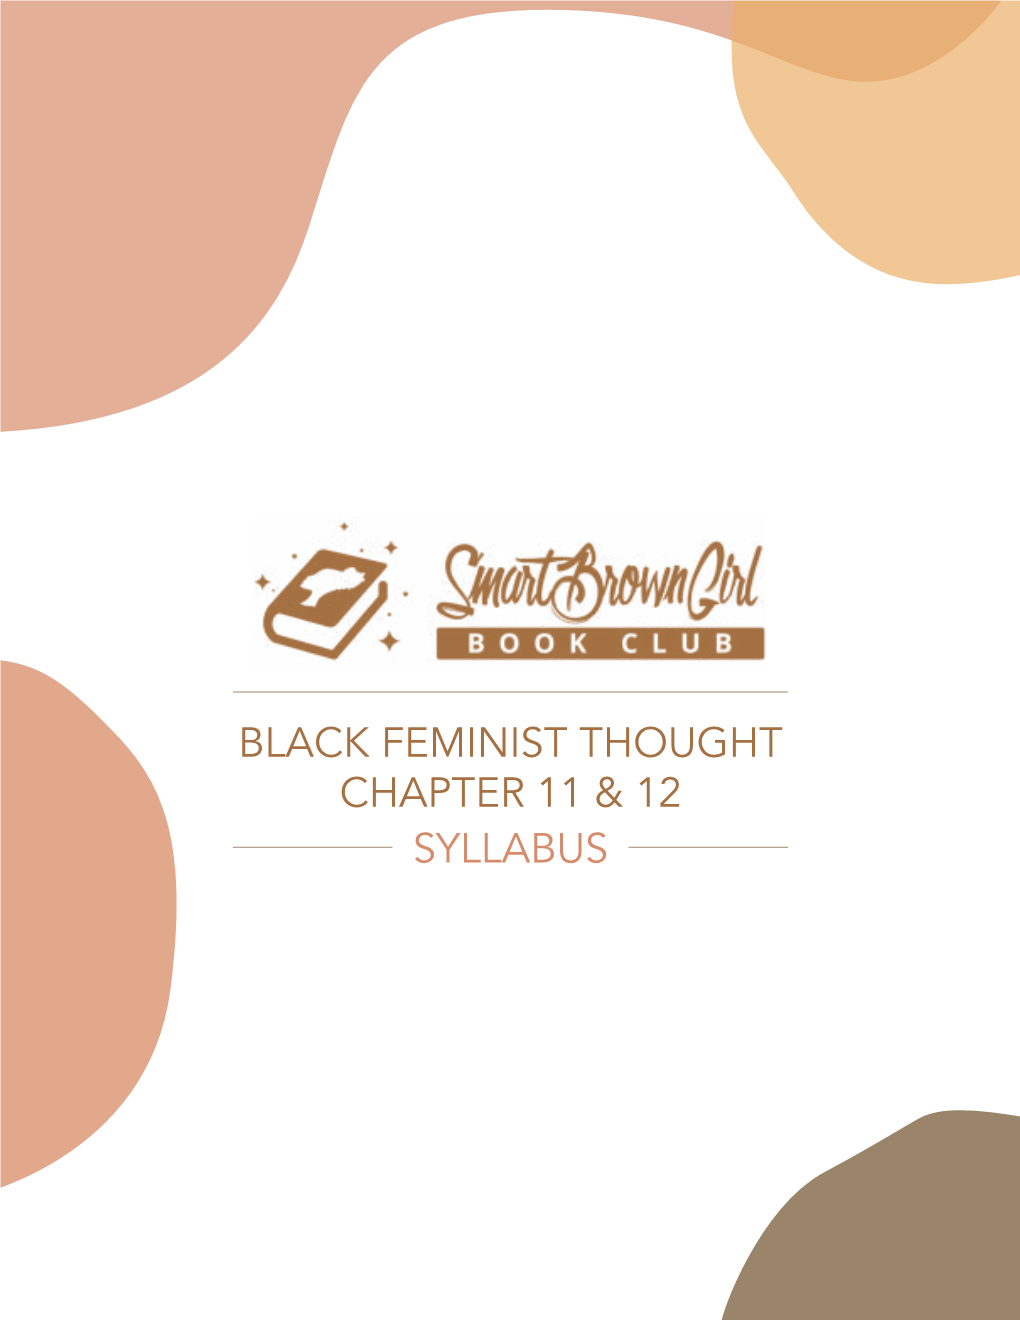 Black Feminist Thought Chapter 11 & 12 Syllabus